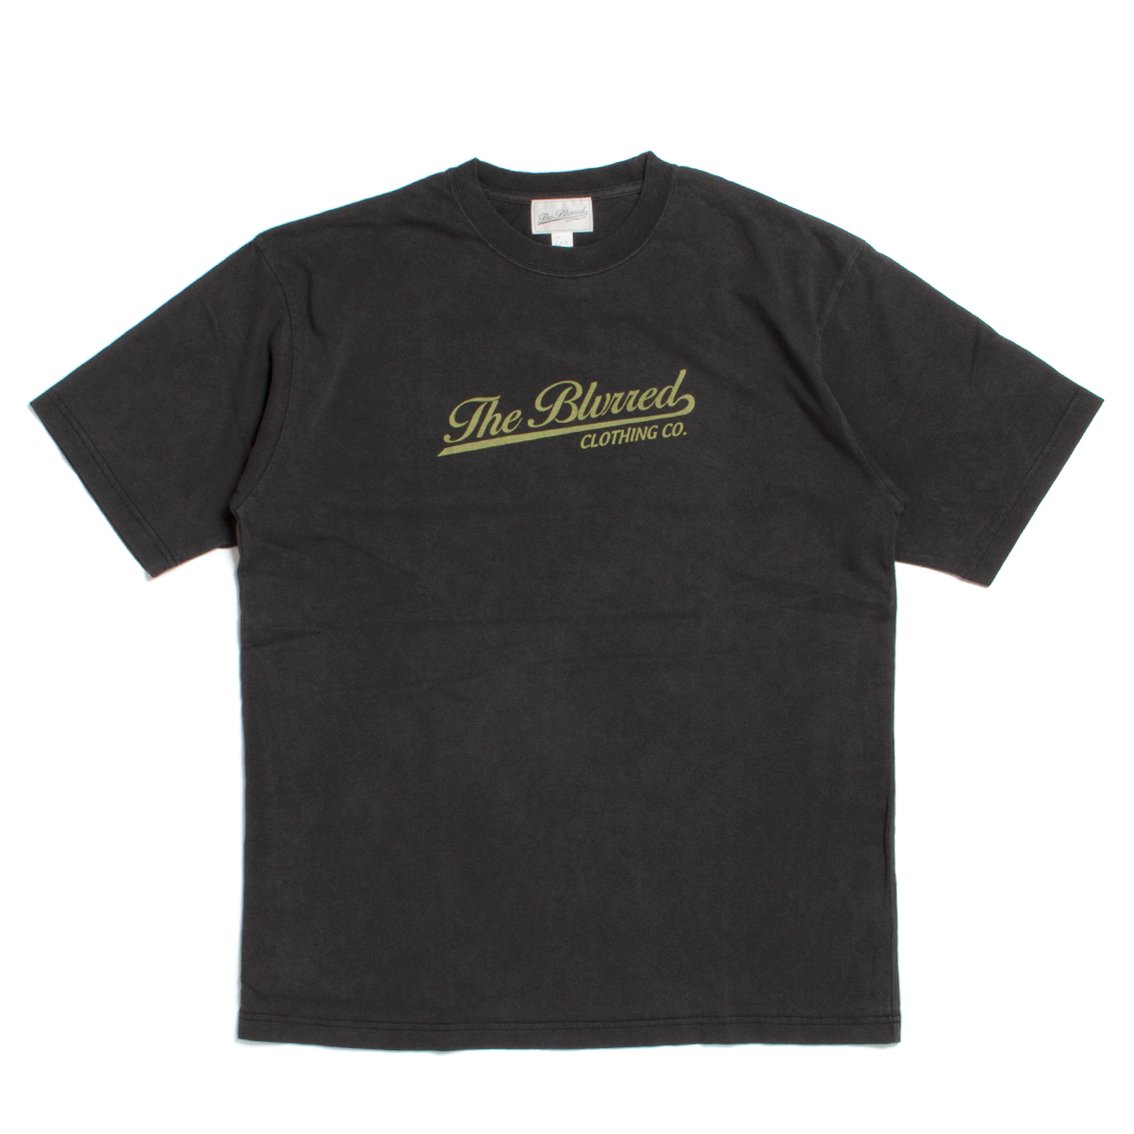 BLURRED CLOTHING / ブラードクロージング] ADVERTISING T-SHIRTS T